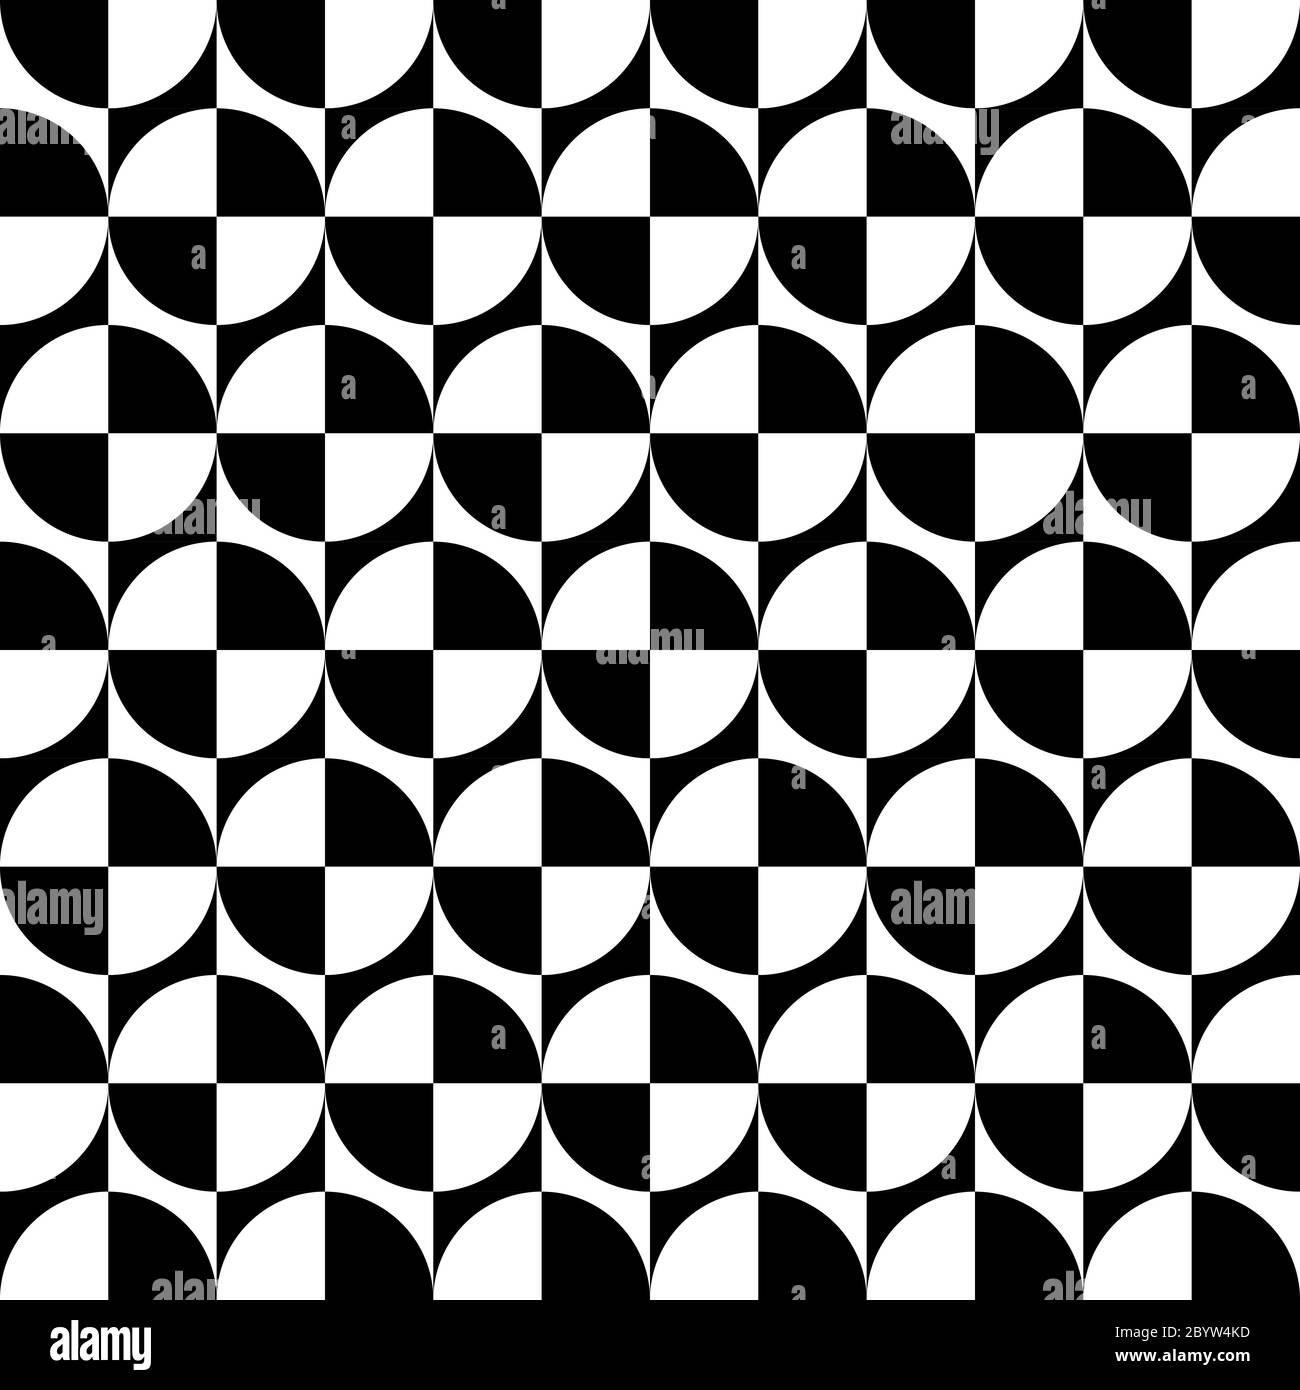 Geometrical signs - circles and squares. High contrast retro seamless pattern in black and white. Vector illustration. Stock Vector